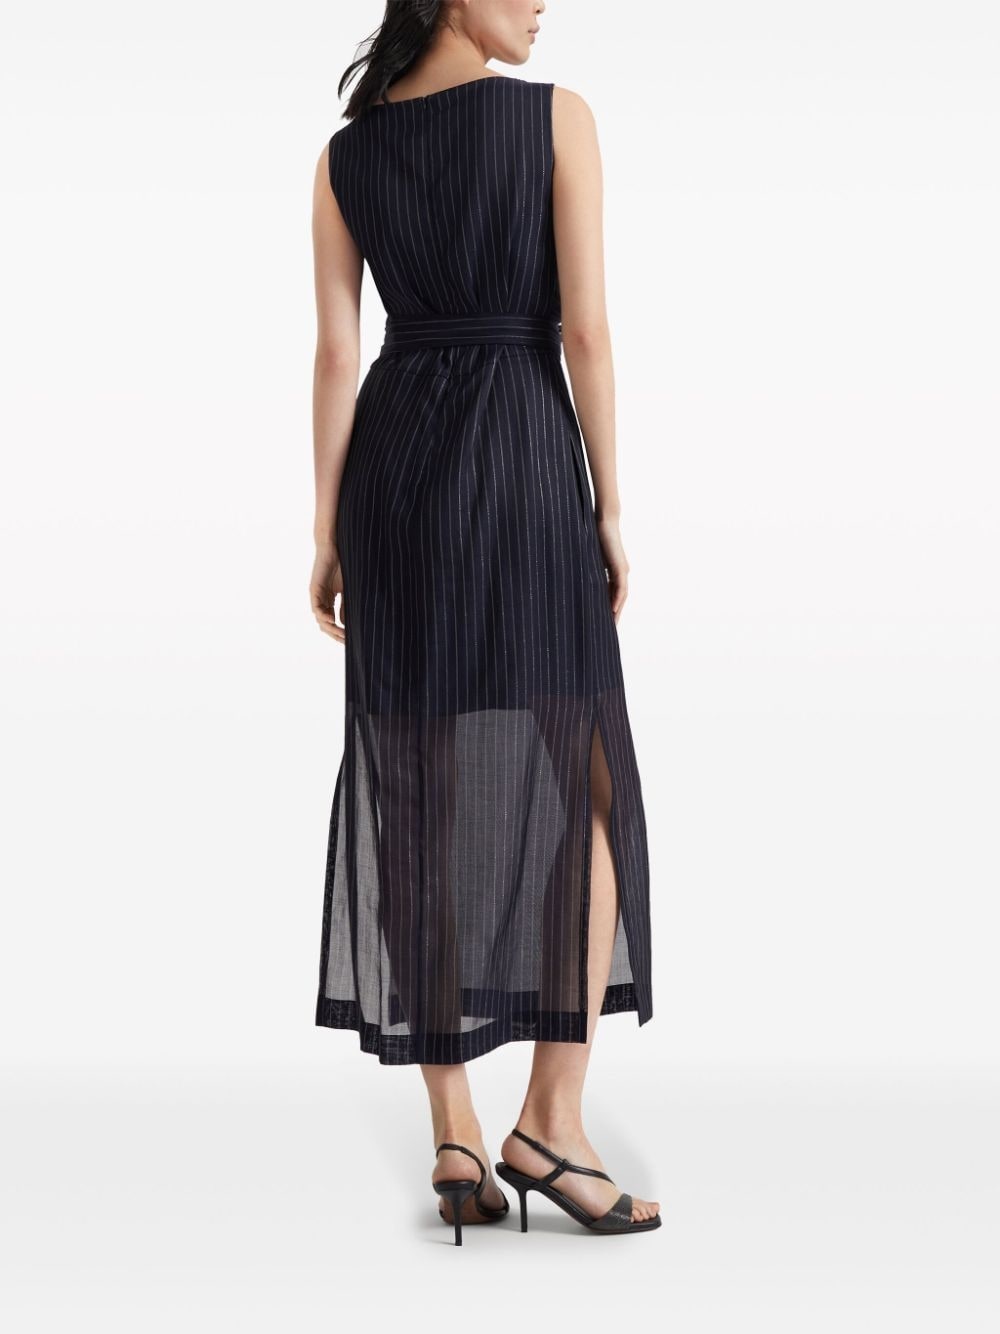 Brunello Cucinelli Cotton Pinstriped Dress With Shiny Details - 5